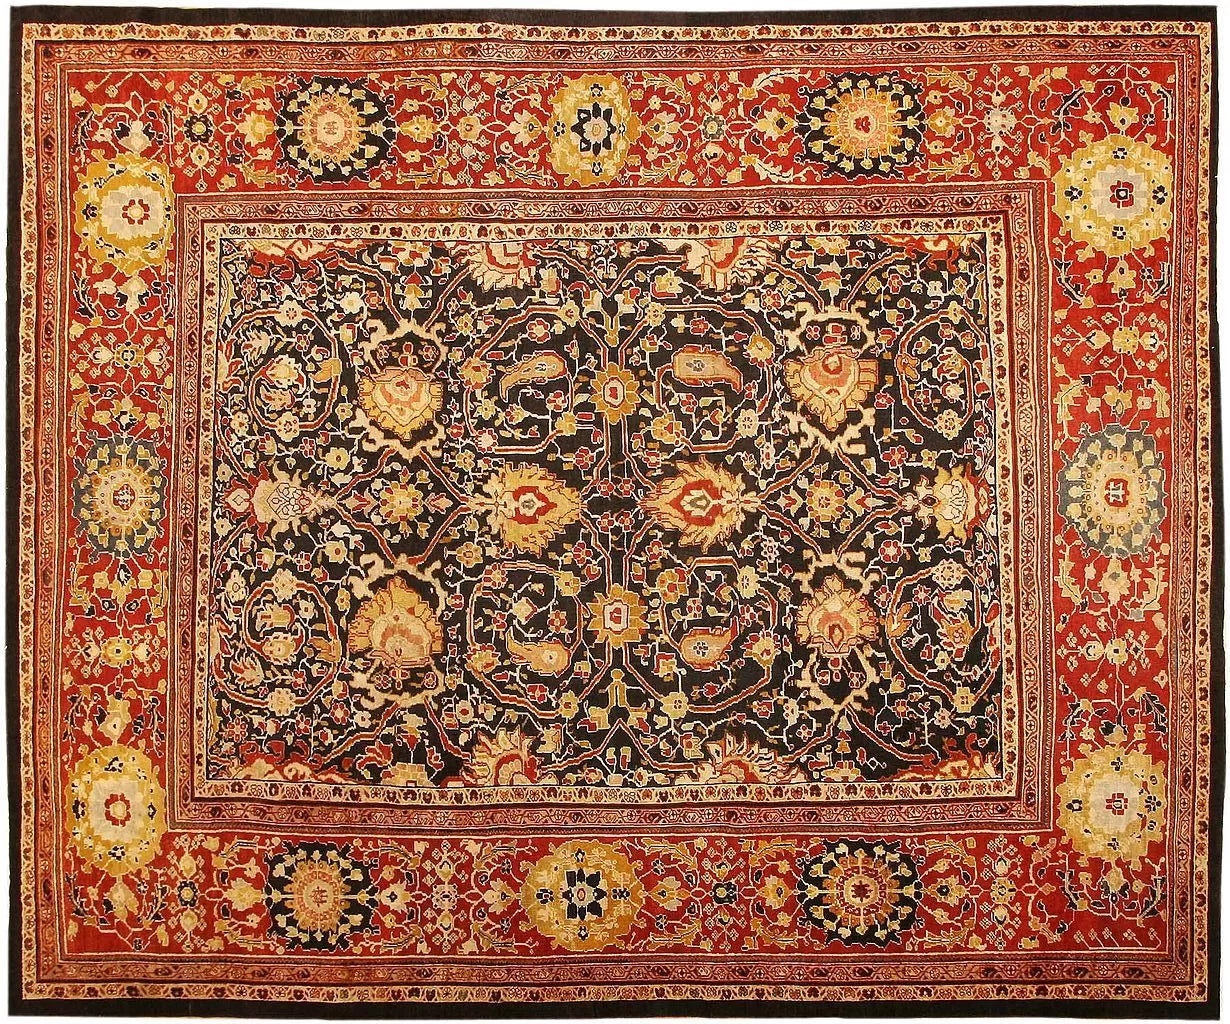 Persian Rug: Patterns, Motifs, Colors, And Layout